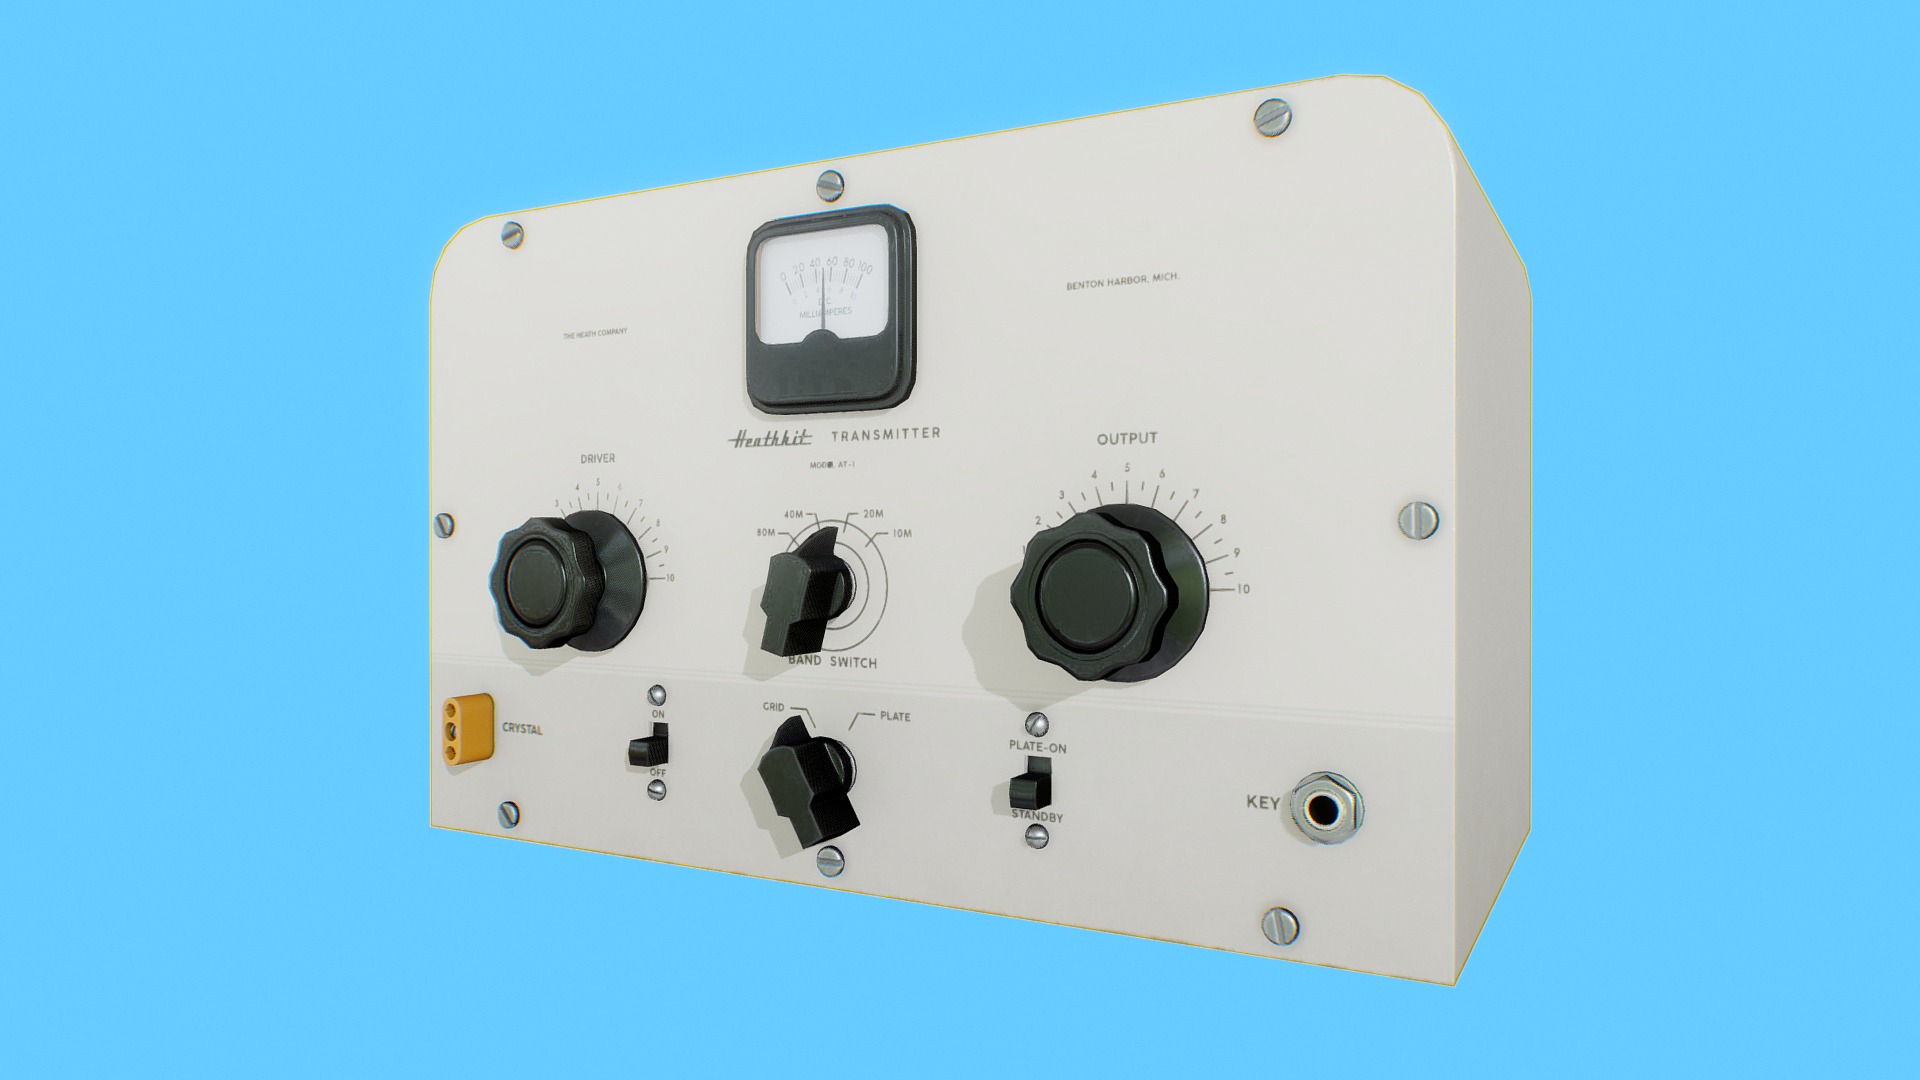 3D model Heathkit AT-1 HAM Radio Transmitter - This is a 3D model of the Heathkit AT-1 HAM Radio Transmitter. The 3D model is about graphical user interface.